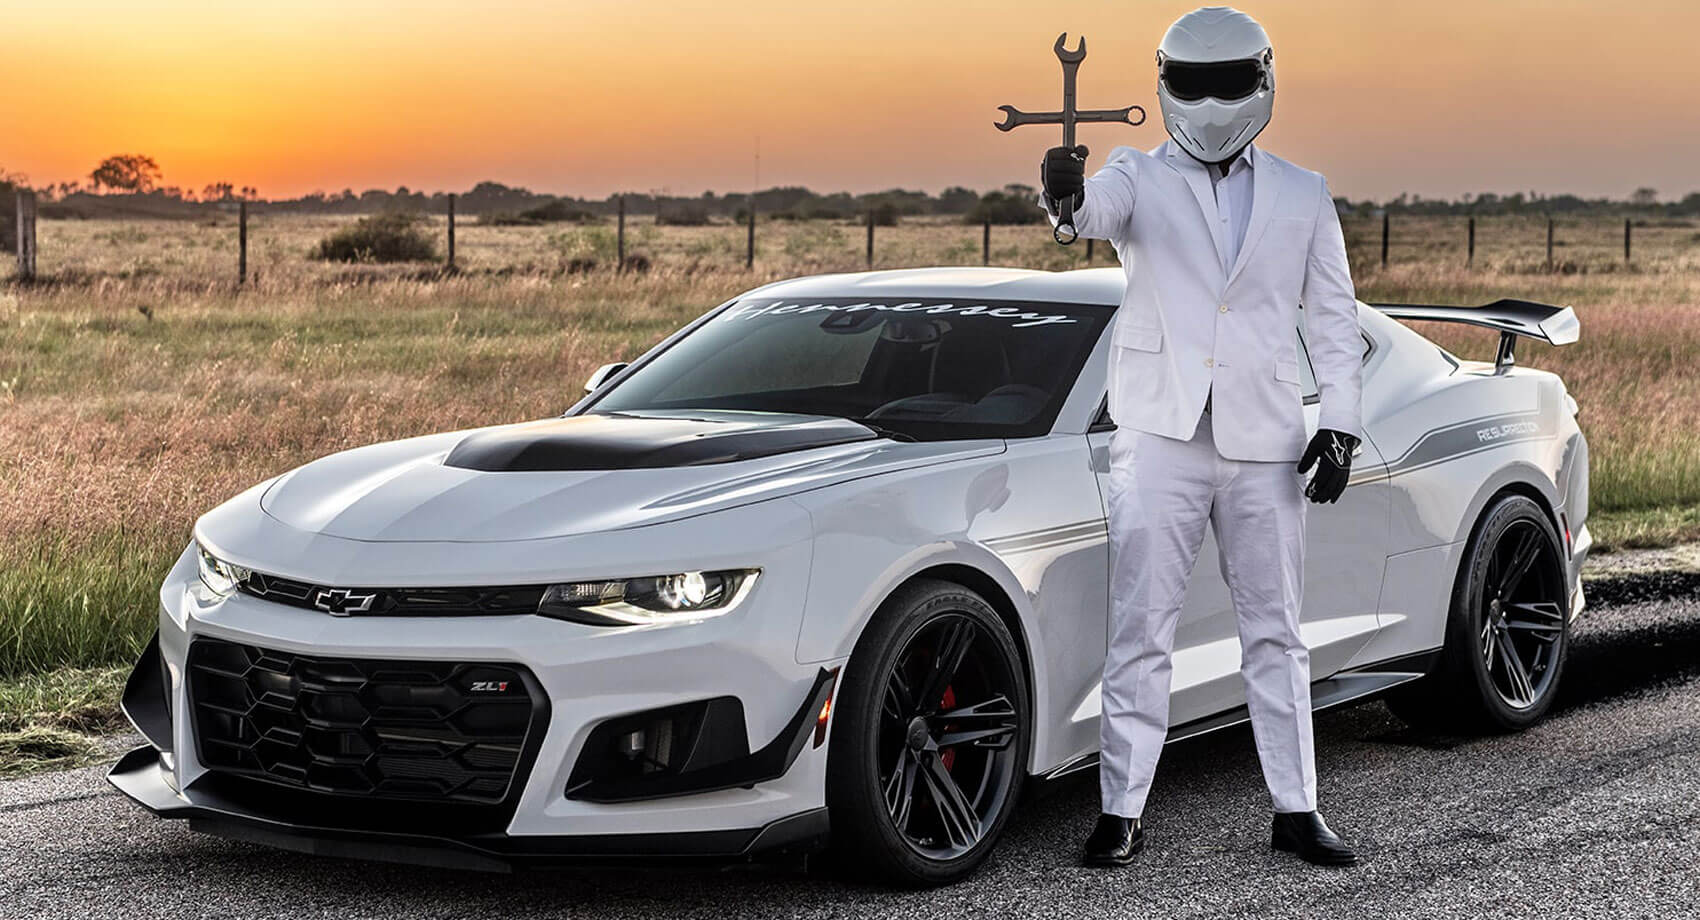 Hennessey Resurrection Is A 'Vette-Powered Camaro Zl1 1Le With 1,200 Hp,  0-60 In 2.3 Sec! | Carscoops